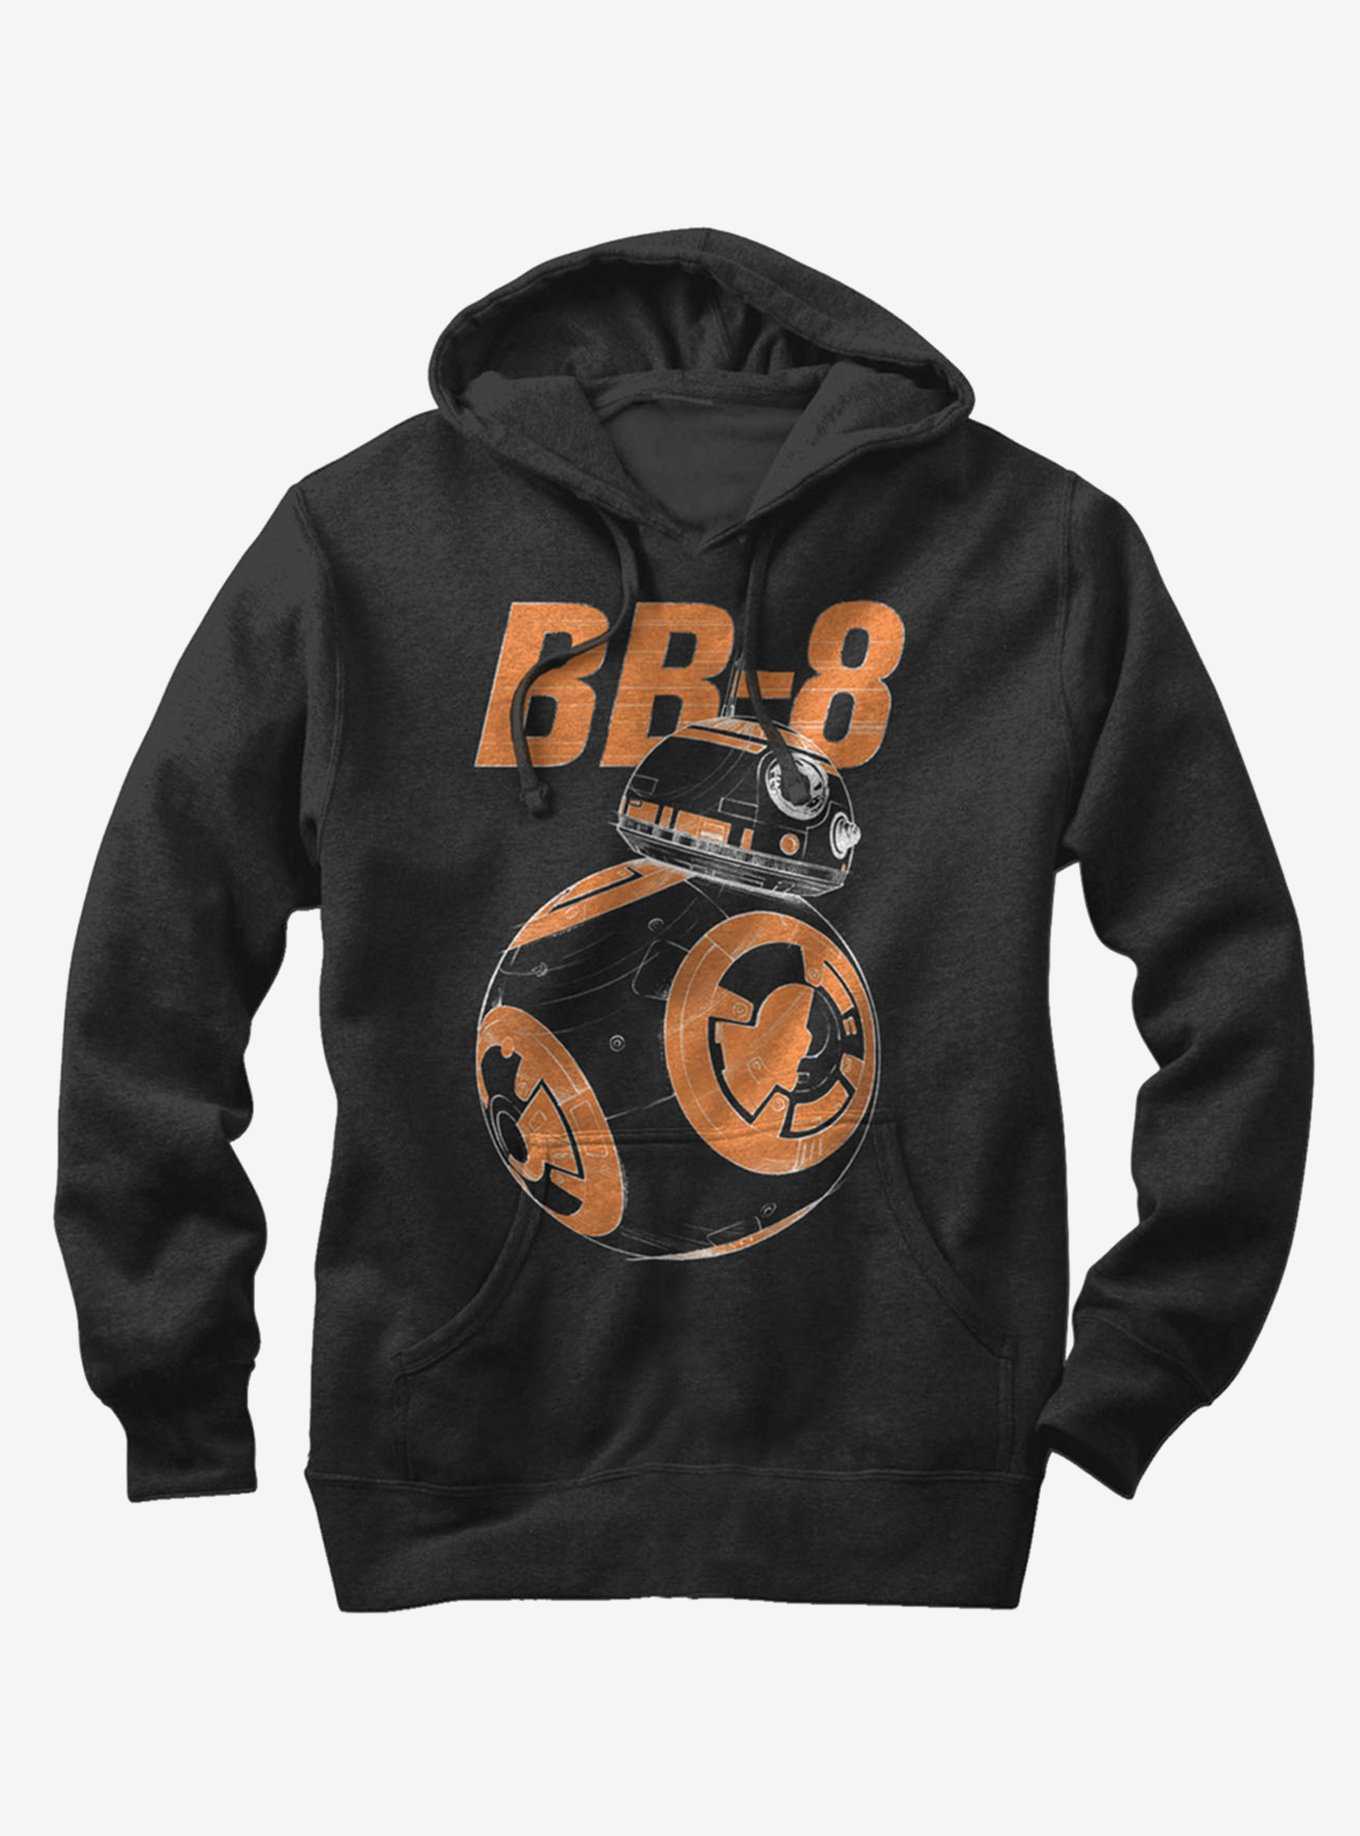 Star Wars BB-8 On the Move Hoodie, , hi-res